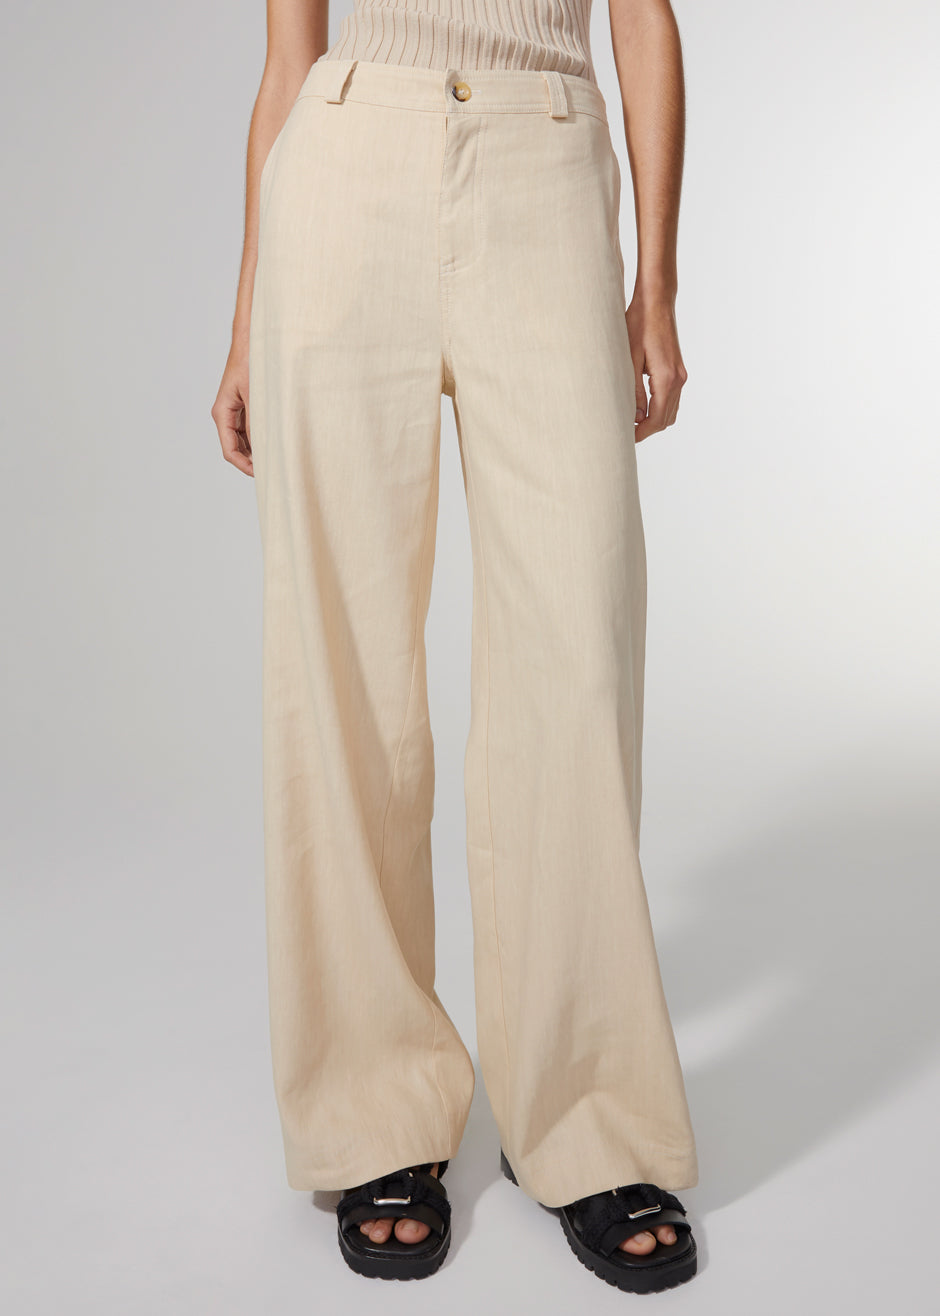 Rodebjer Annie Pants - Warm Sand - 1